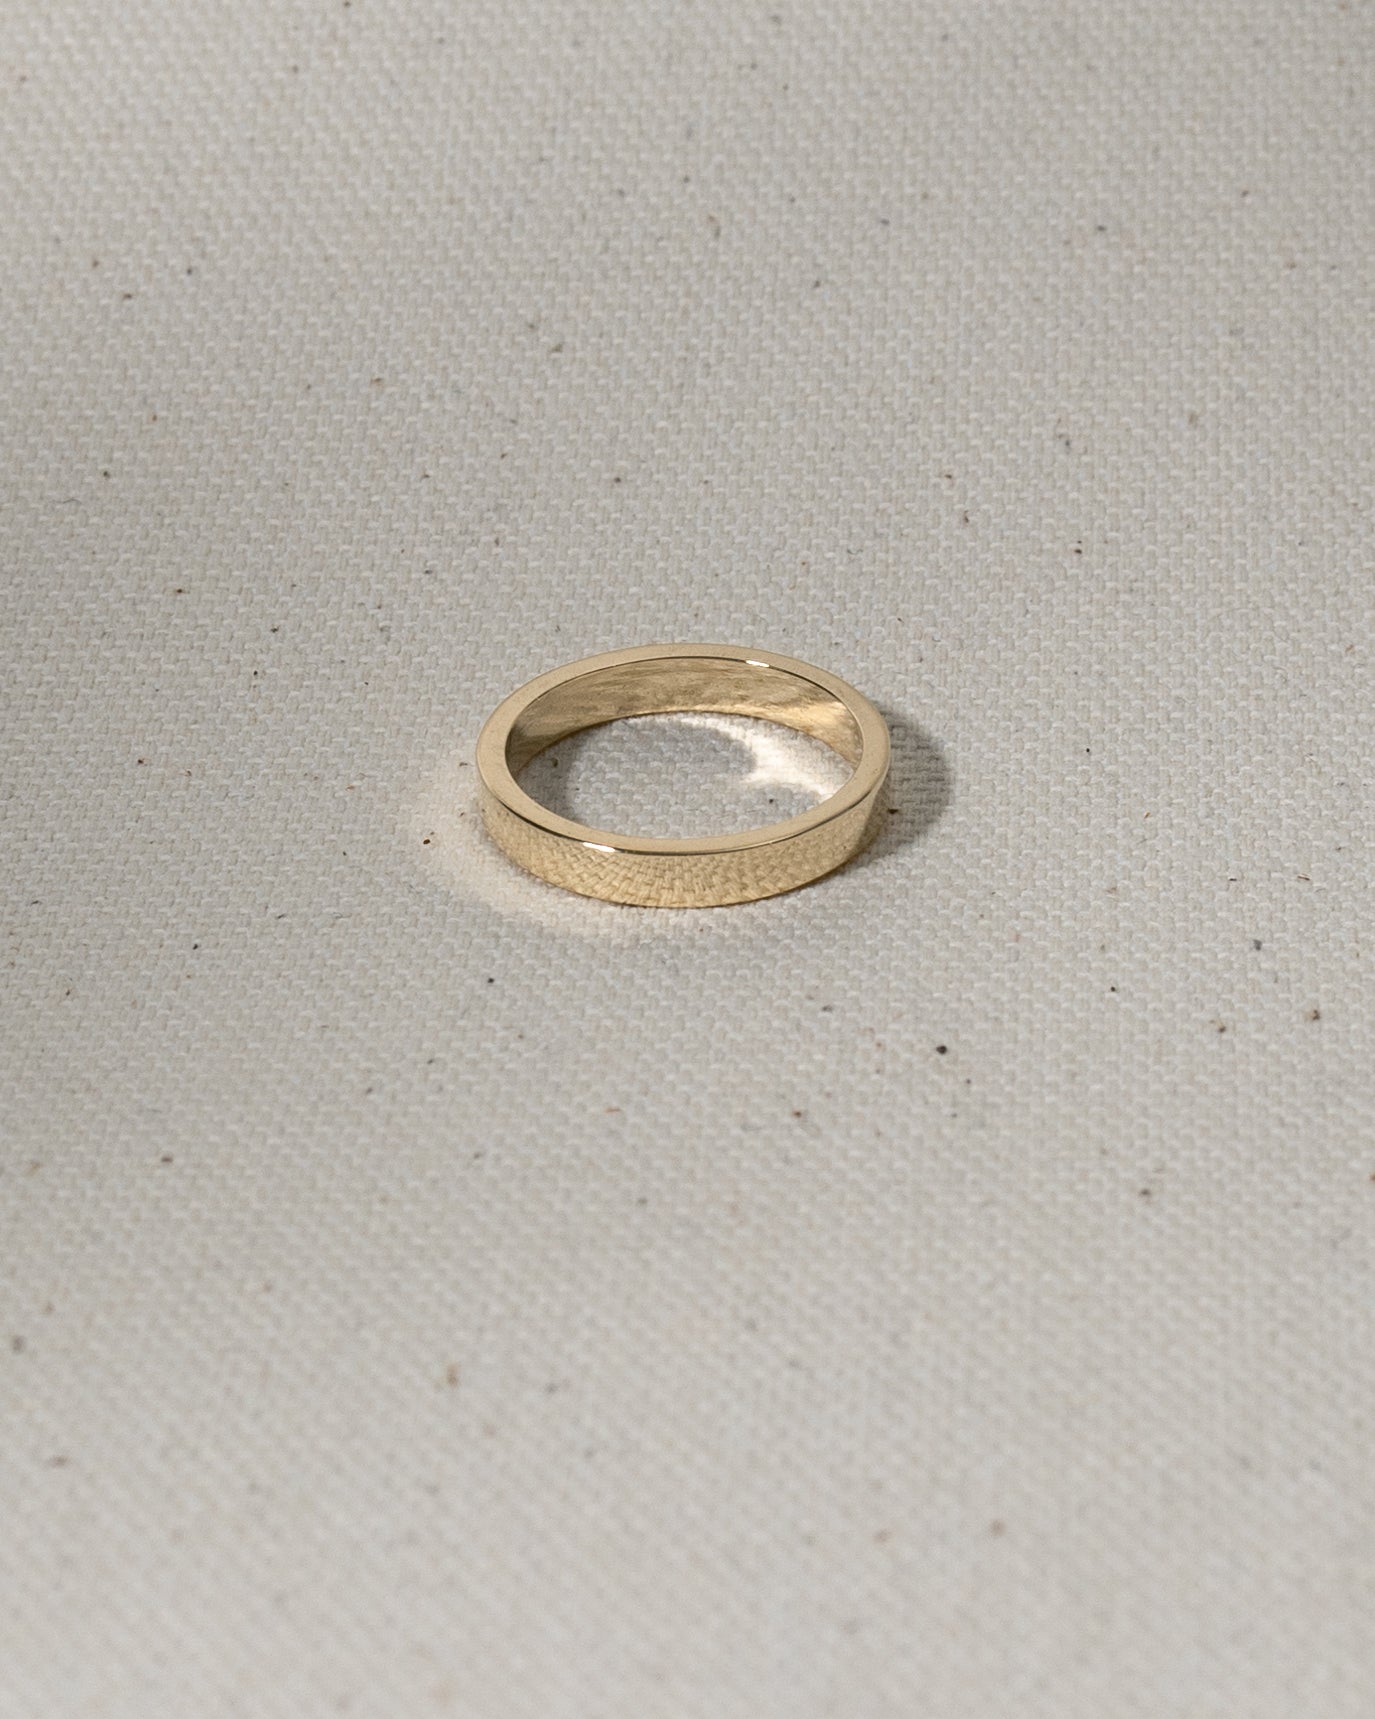 Reflection Ring at 3.0mm Wide